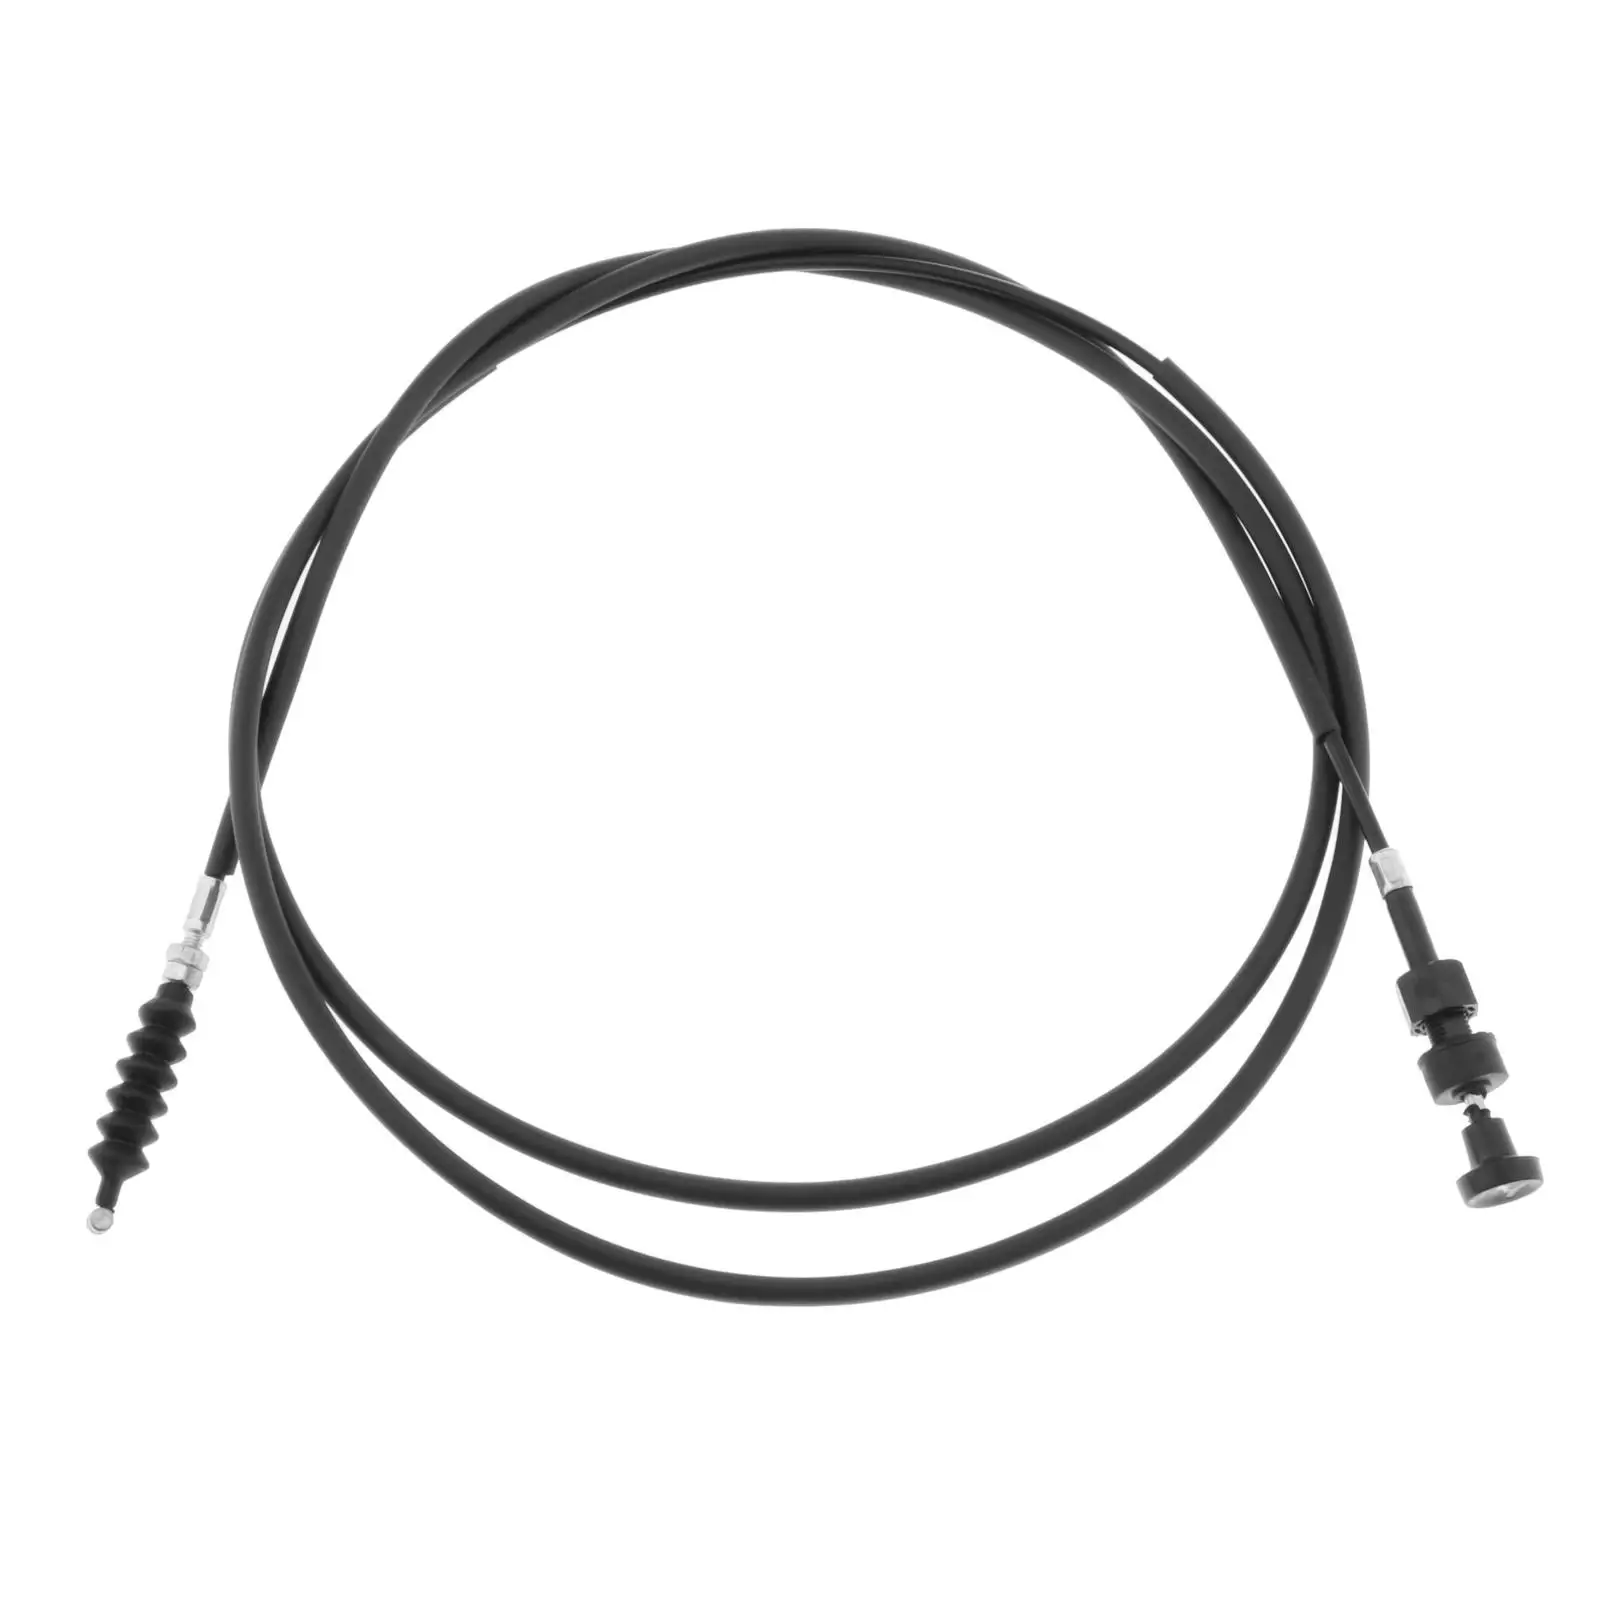 Choke 54017-1208 Starter Cable Fit for 3010 3020 Mule